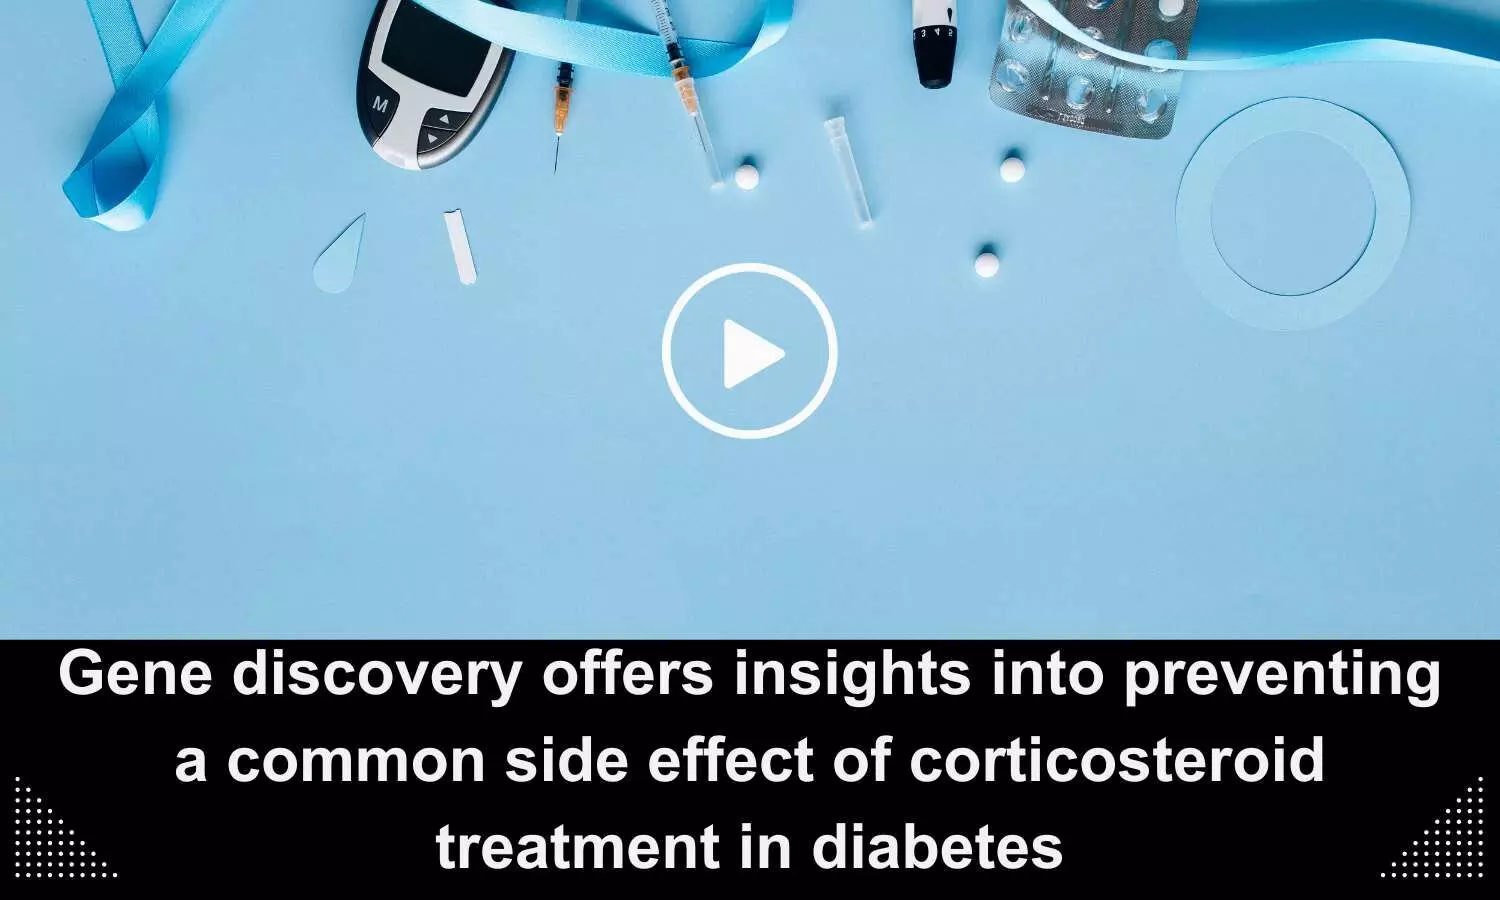 Gene discovery offers insights into preventing a common side effect of corticosteroid treatment in diabetes